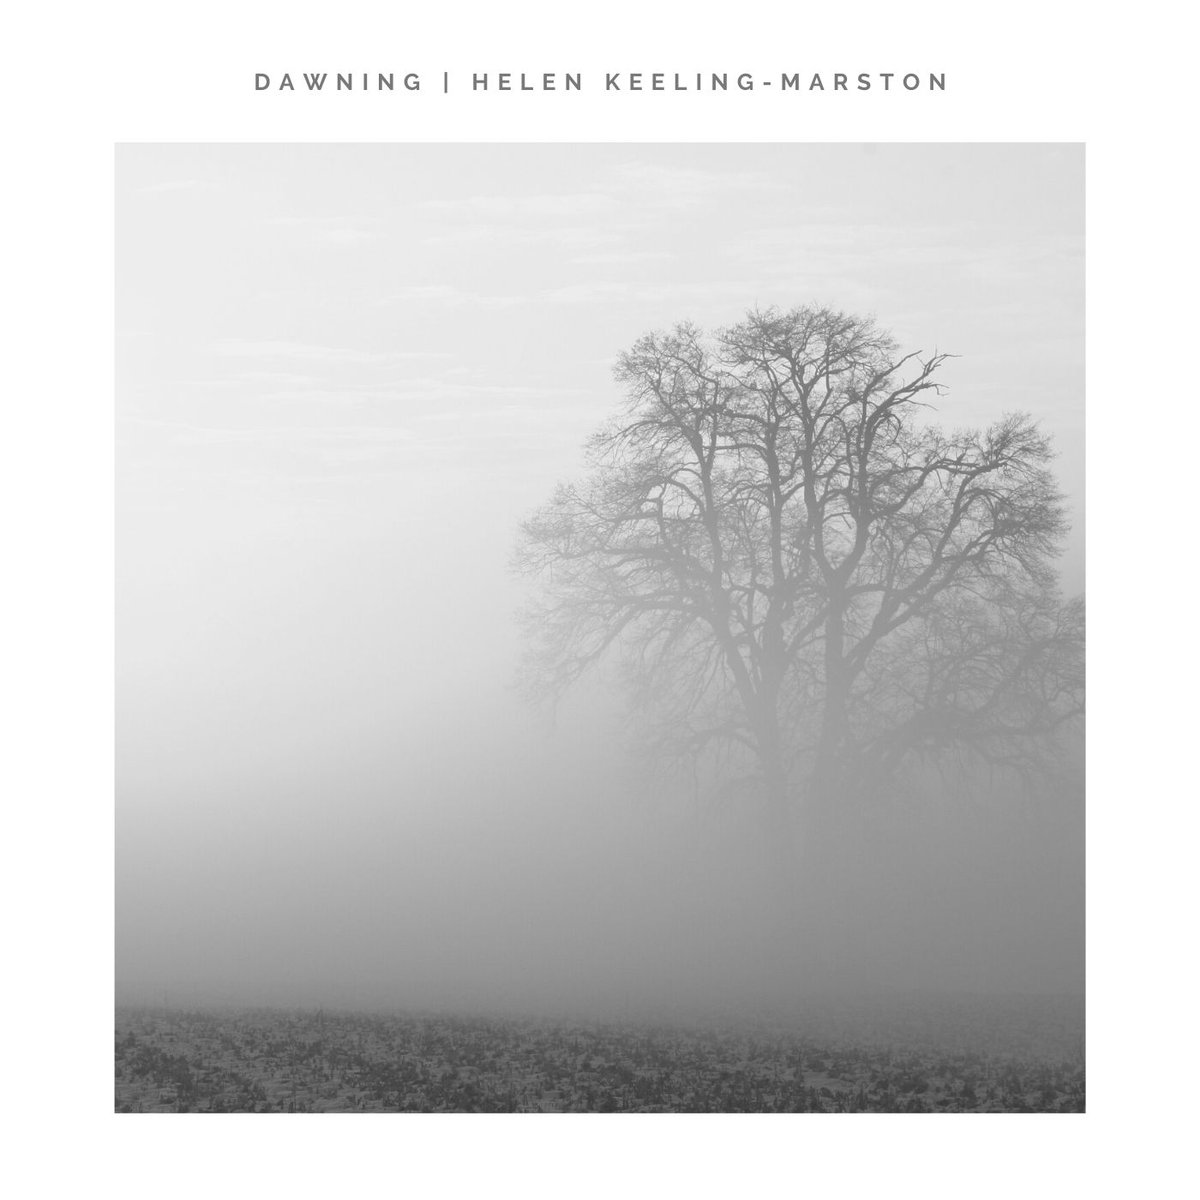 Now spinning on @pandoramusic, Dawning is about the dawning of a new day, but also the dawning of a new spring and summer (hence its April release). It’s an intimate, chilled piano piece. Do give it a listen if you'd like to. pandora.app.link/WzSPTNnnJIb @pandoraAMP